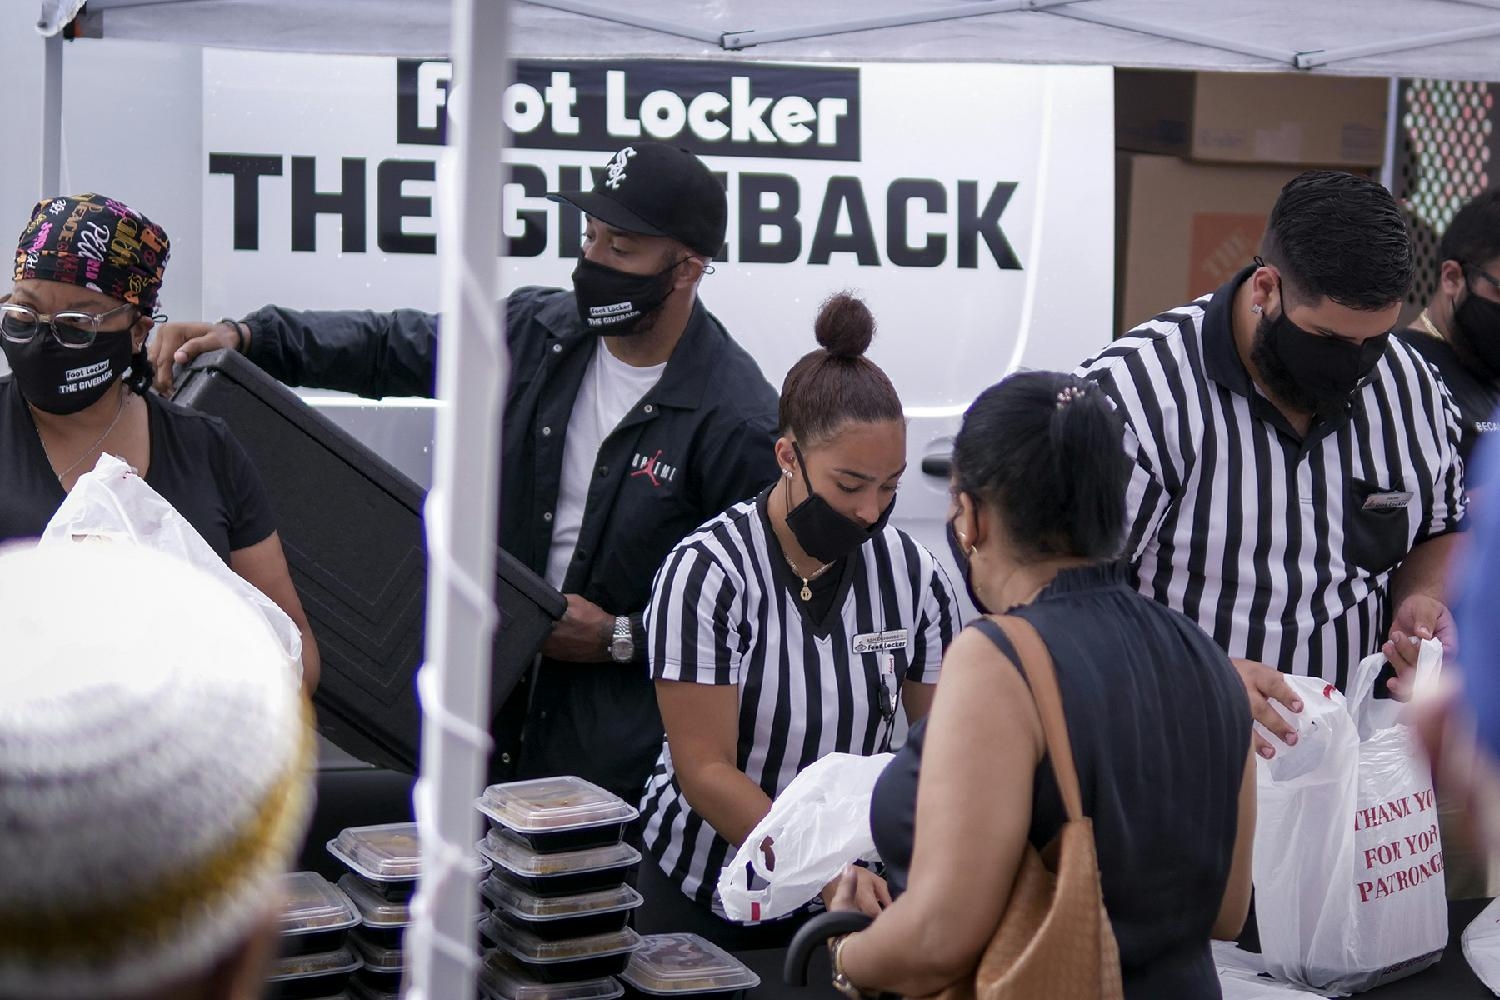 Inspiring and empowering our communities is at the center of what we do at Foot Locker.